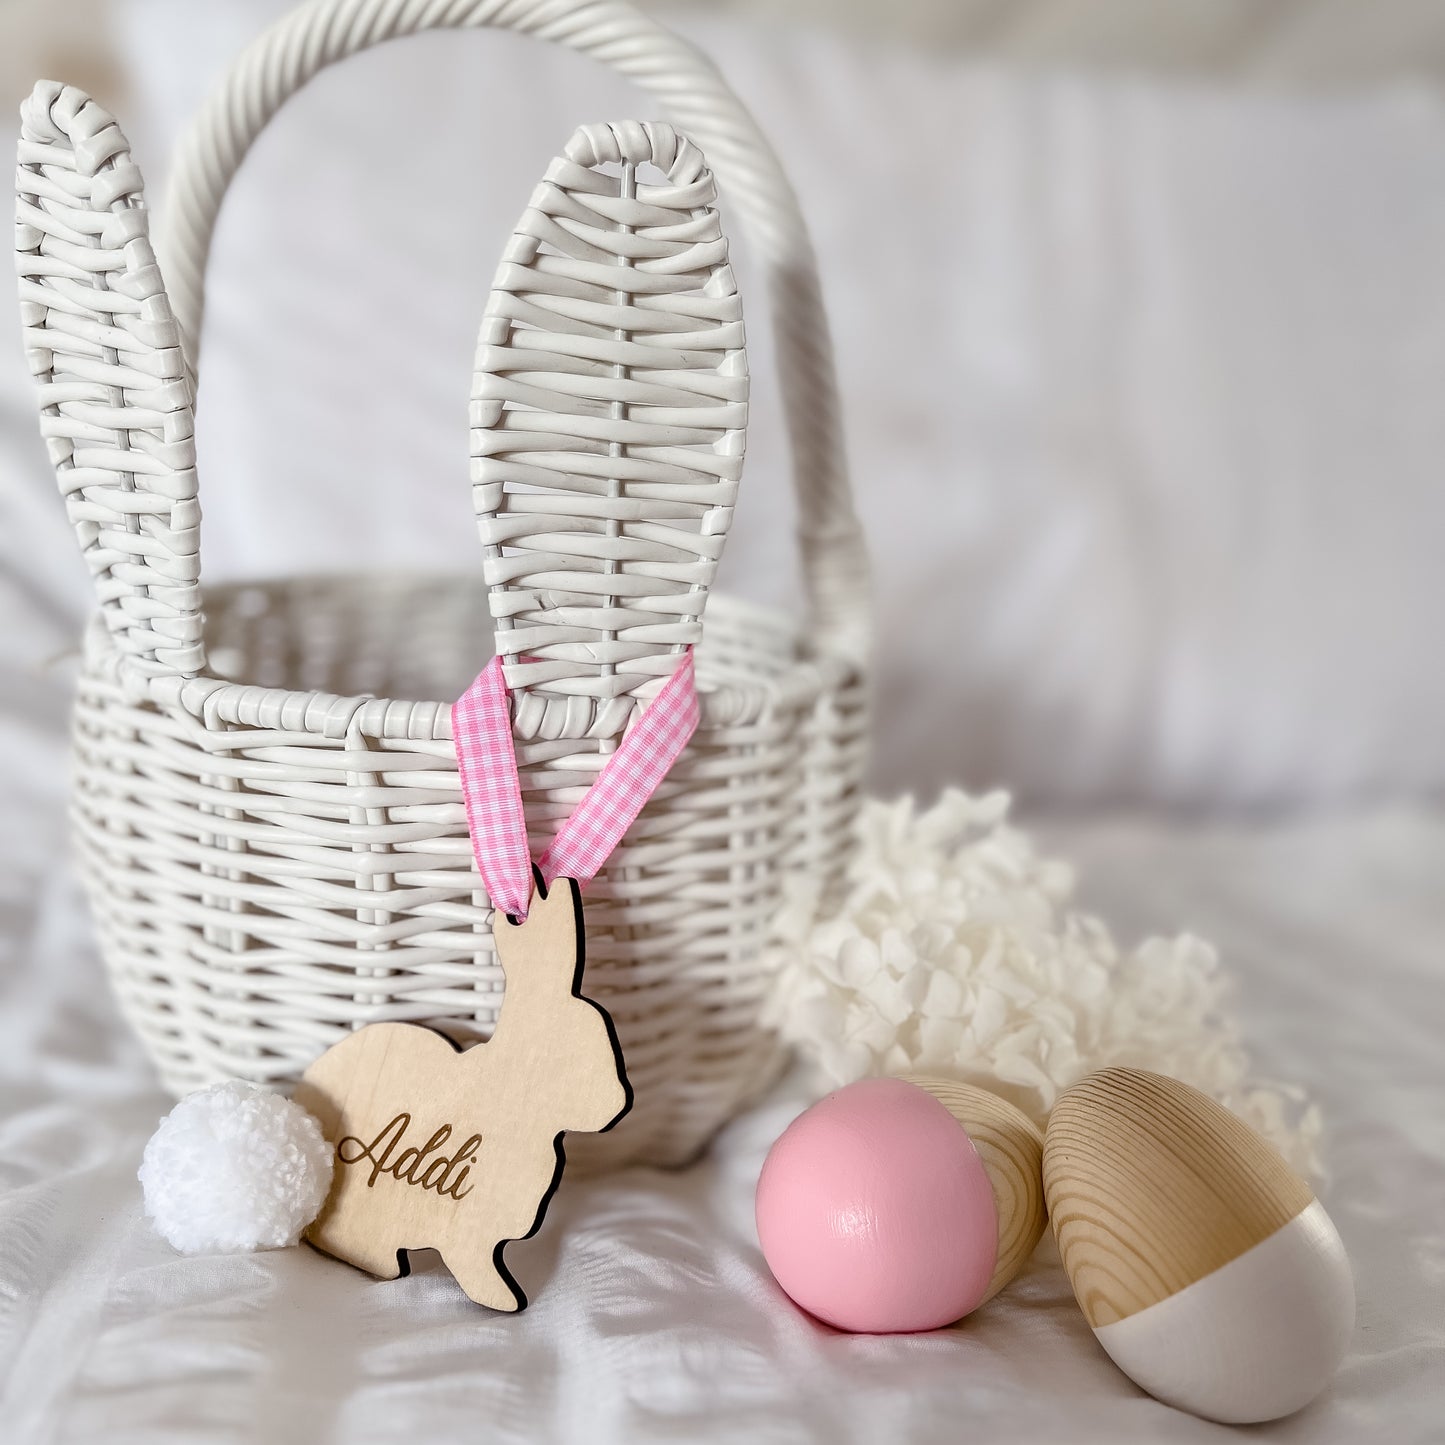 Wooden Easter Bunny Name Tag - Pompom Tail